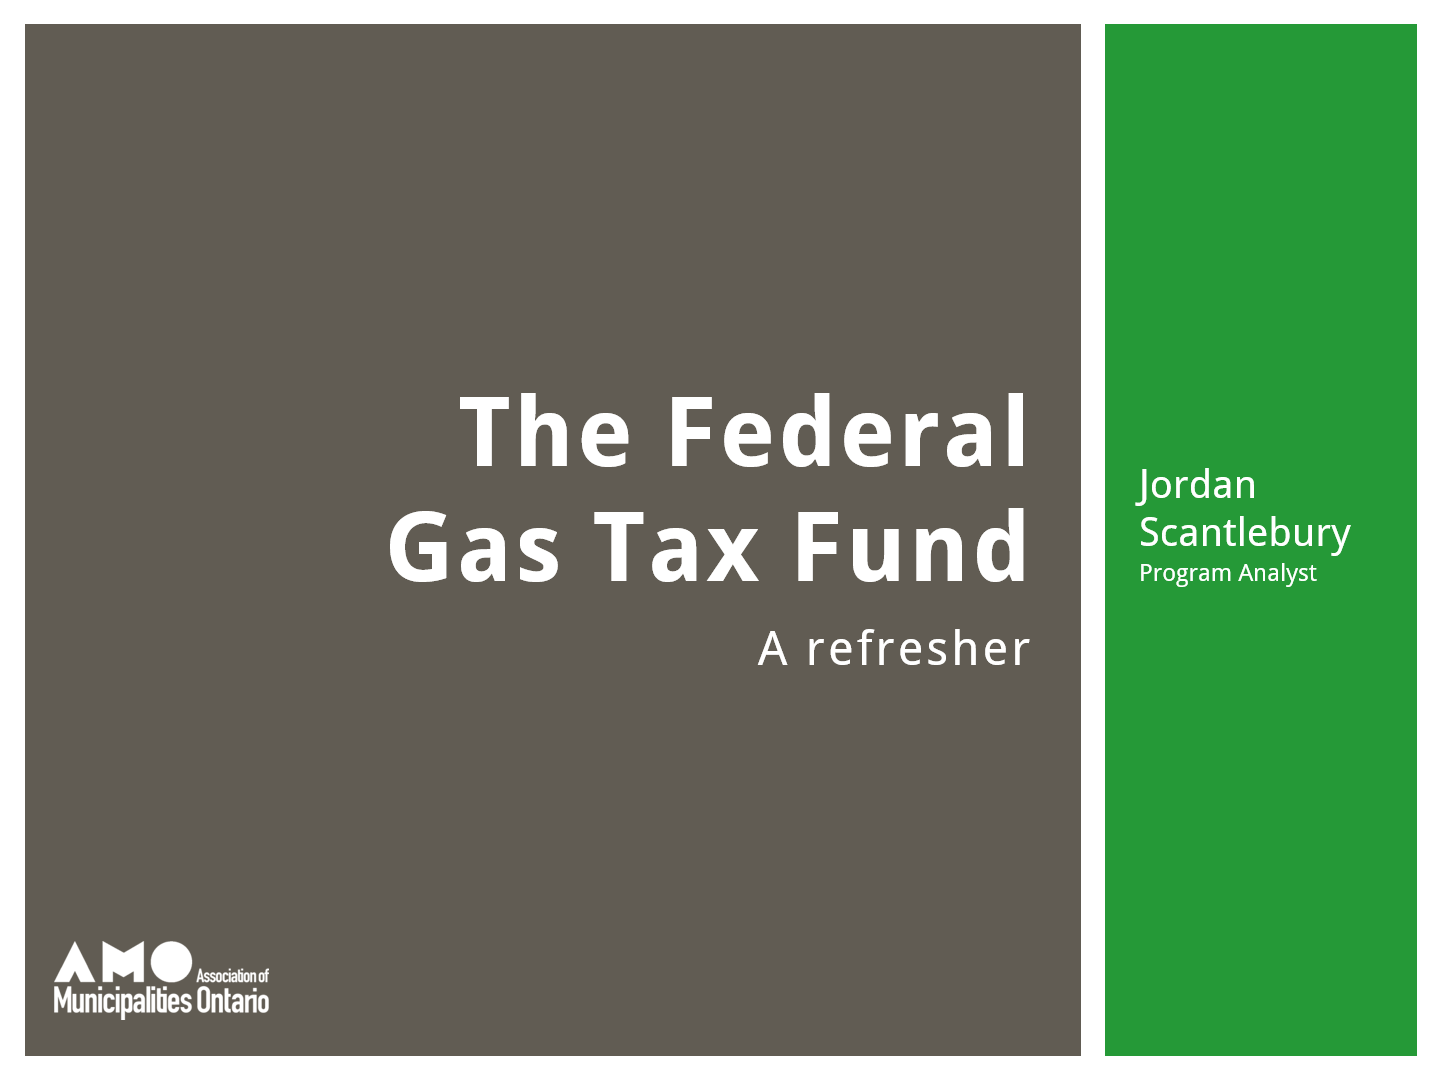 Screenshot of PowerPoint slide deck introducing the federal Gas Tax Fund